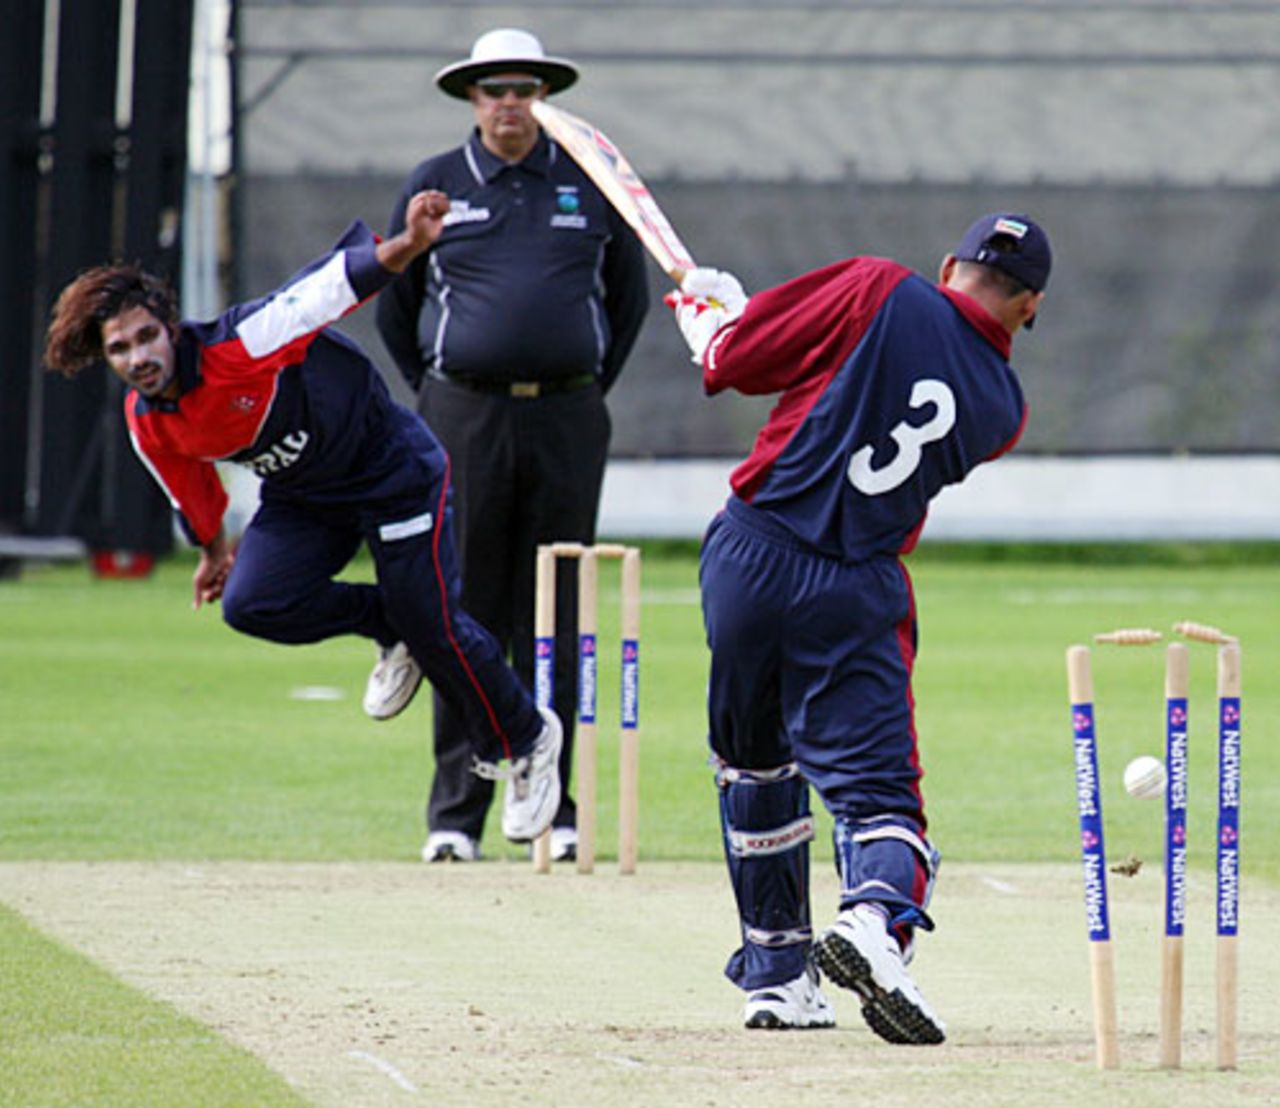 Mahaboob Alam completes his ten-wicket haul, Nepal v Mozambique, World Cricket League Division 5, Jersey, May 25, 2008